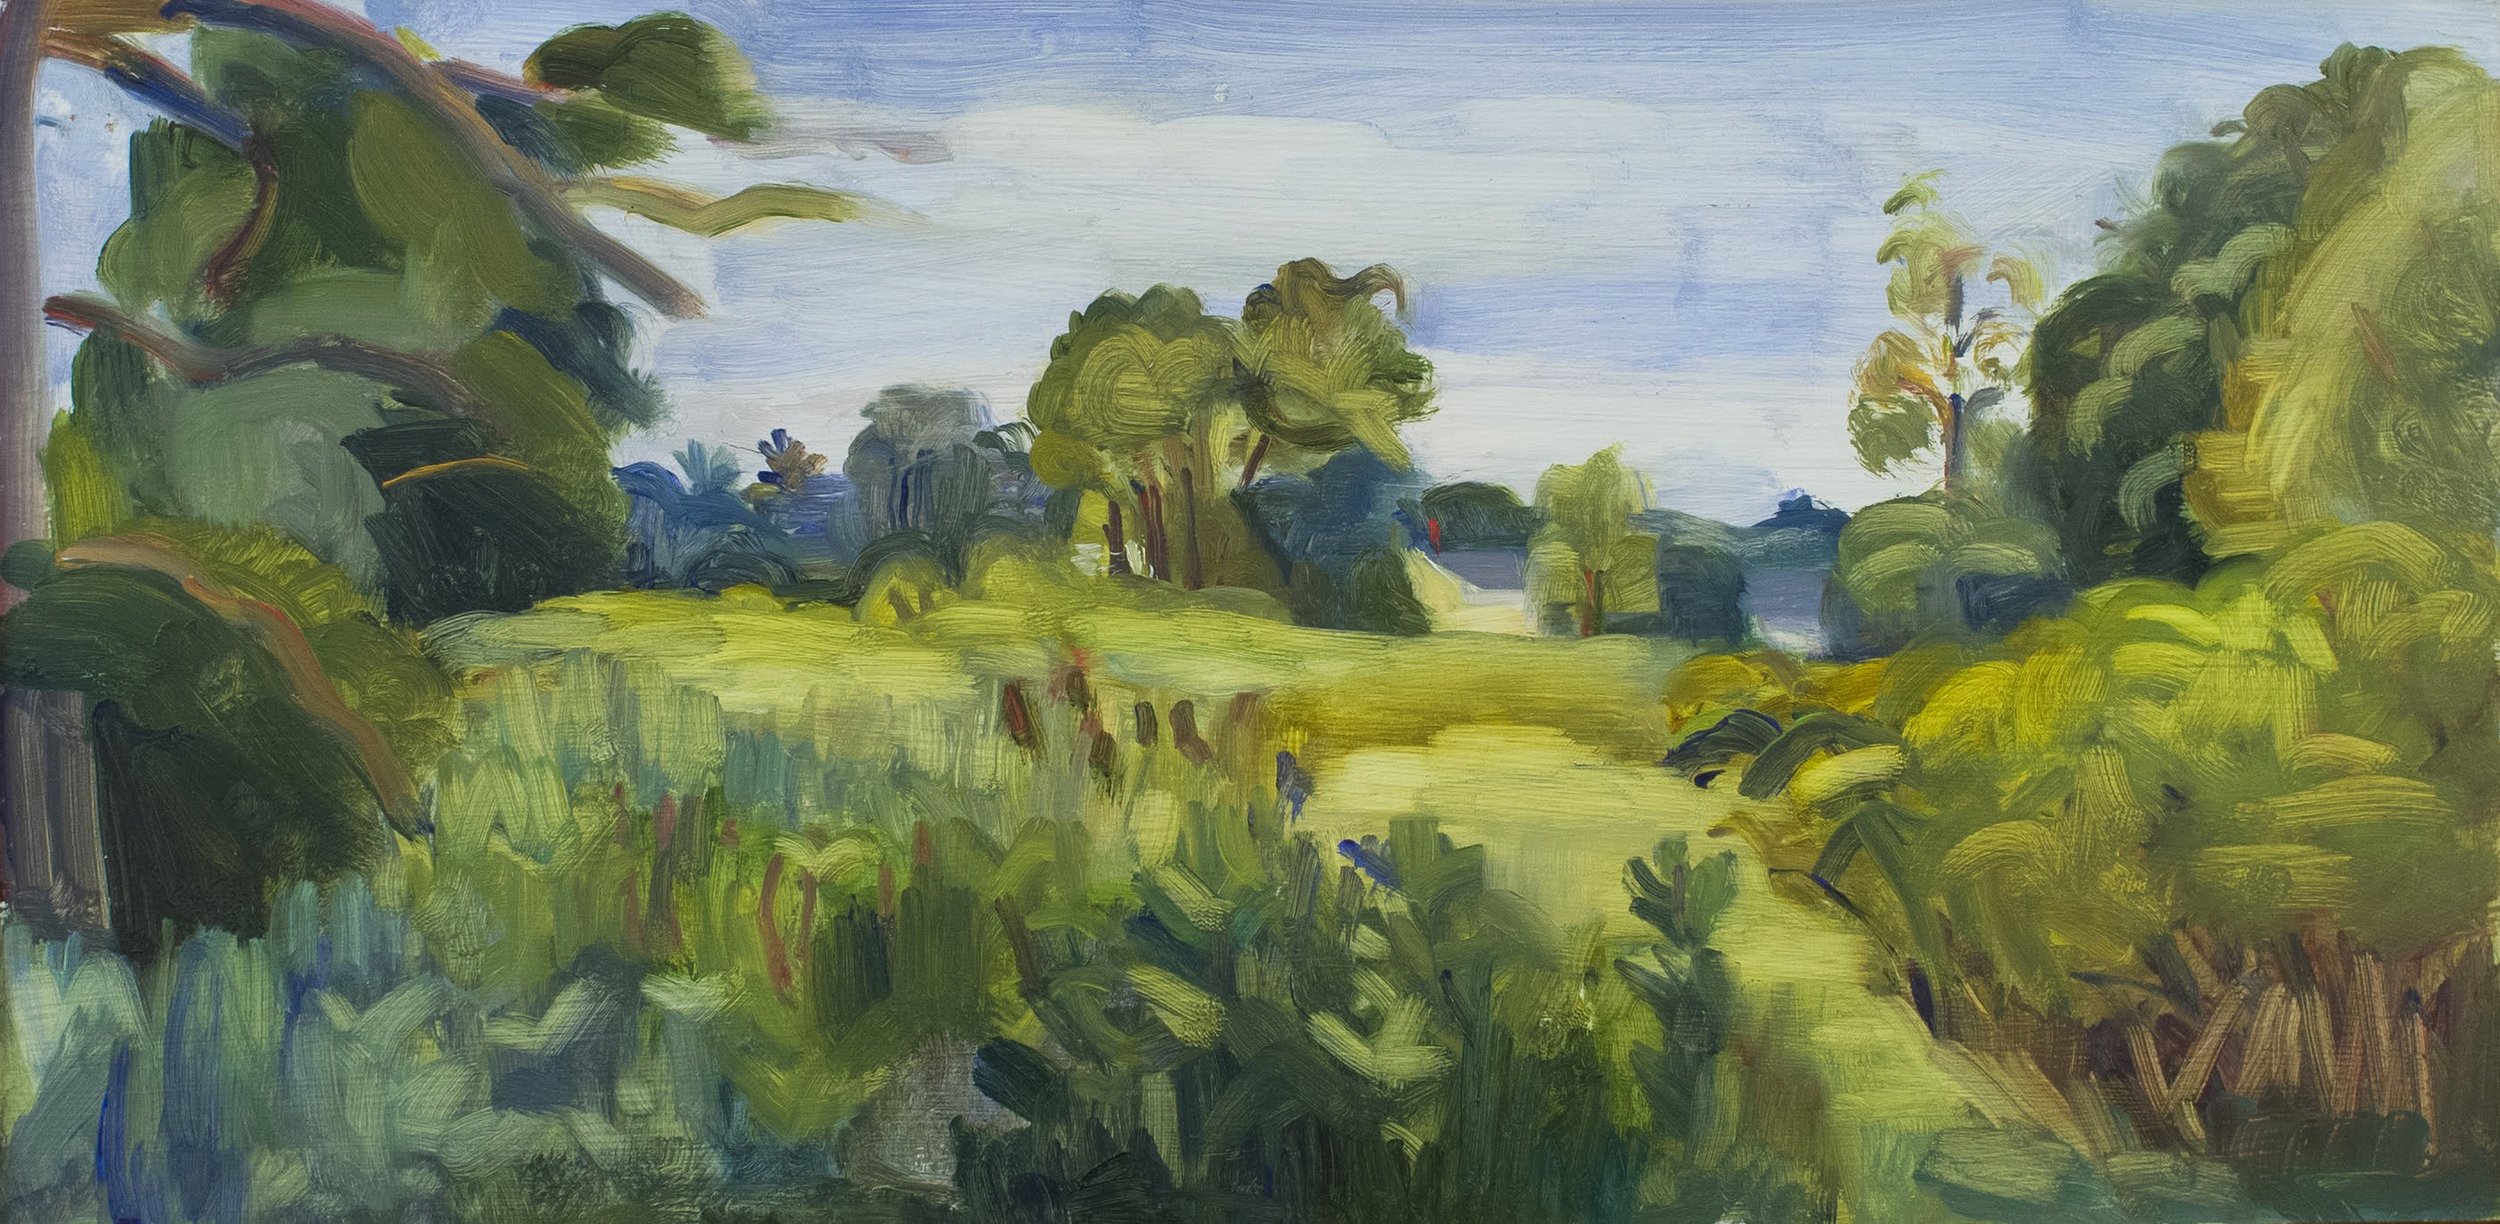   Sharp Farm–Towards Stillwater , c. 2000, oil/panel, 8 x 16 in. (Private collection) 